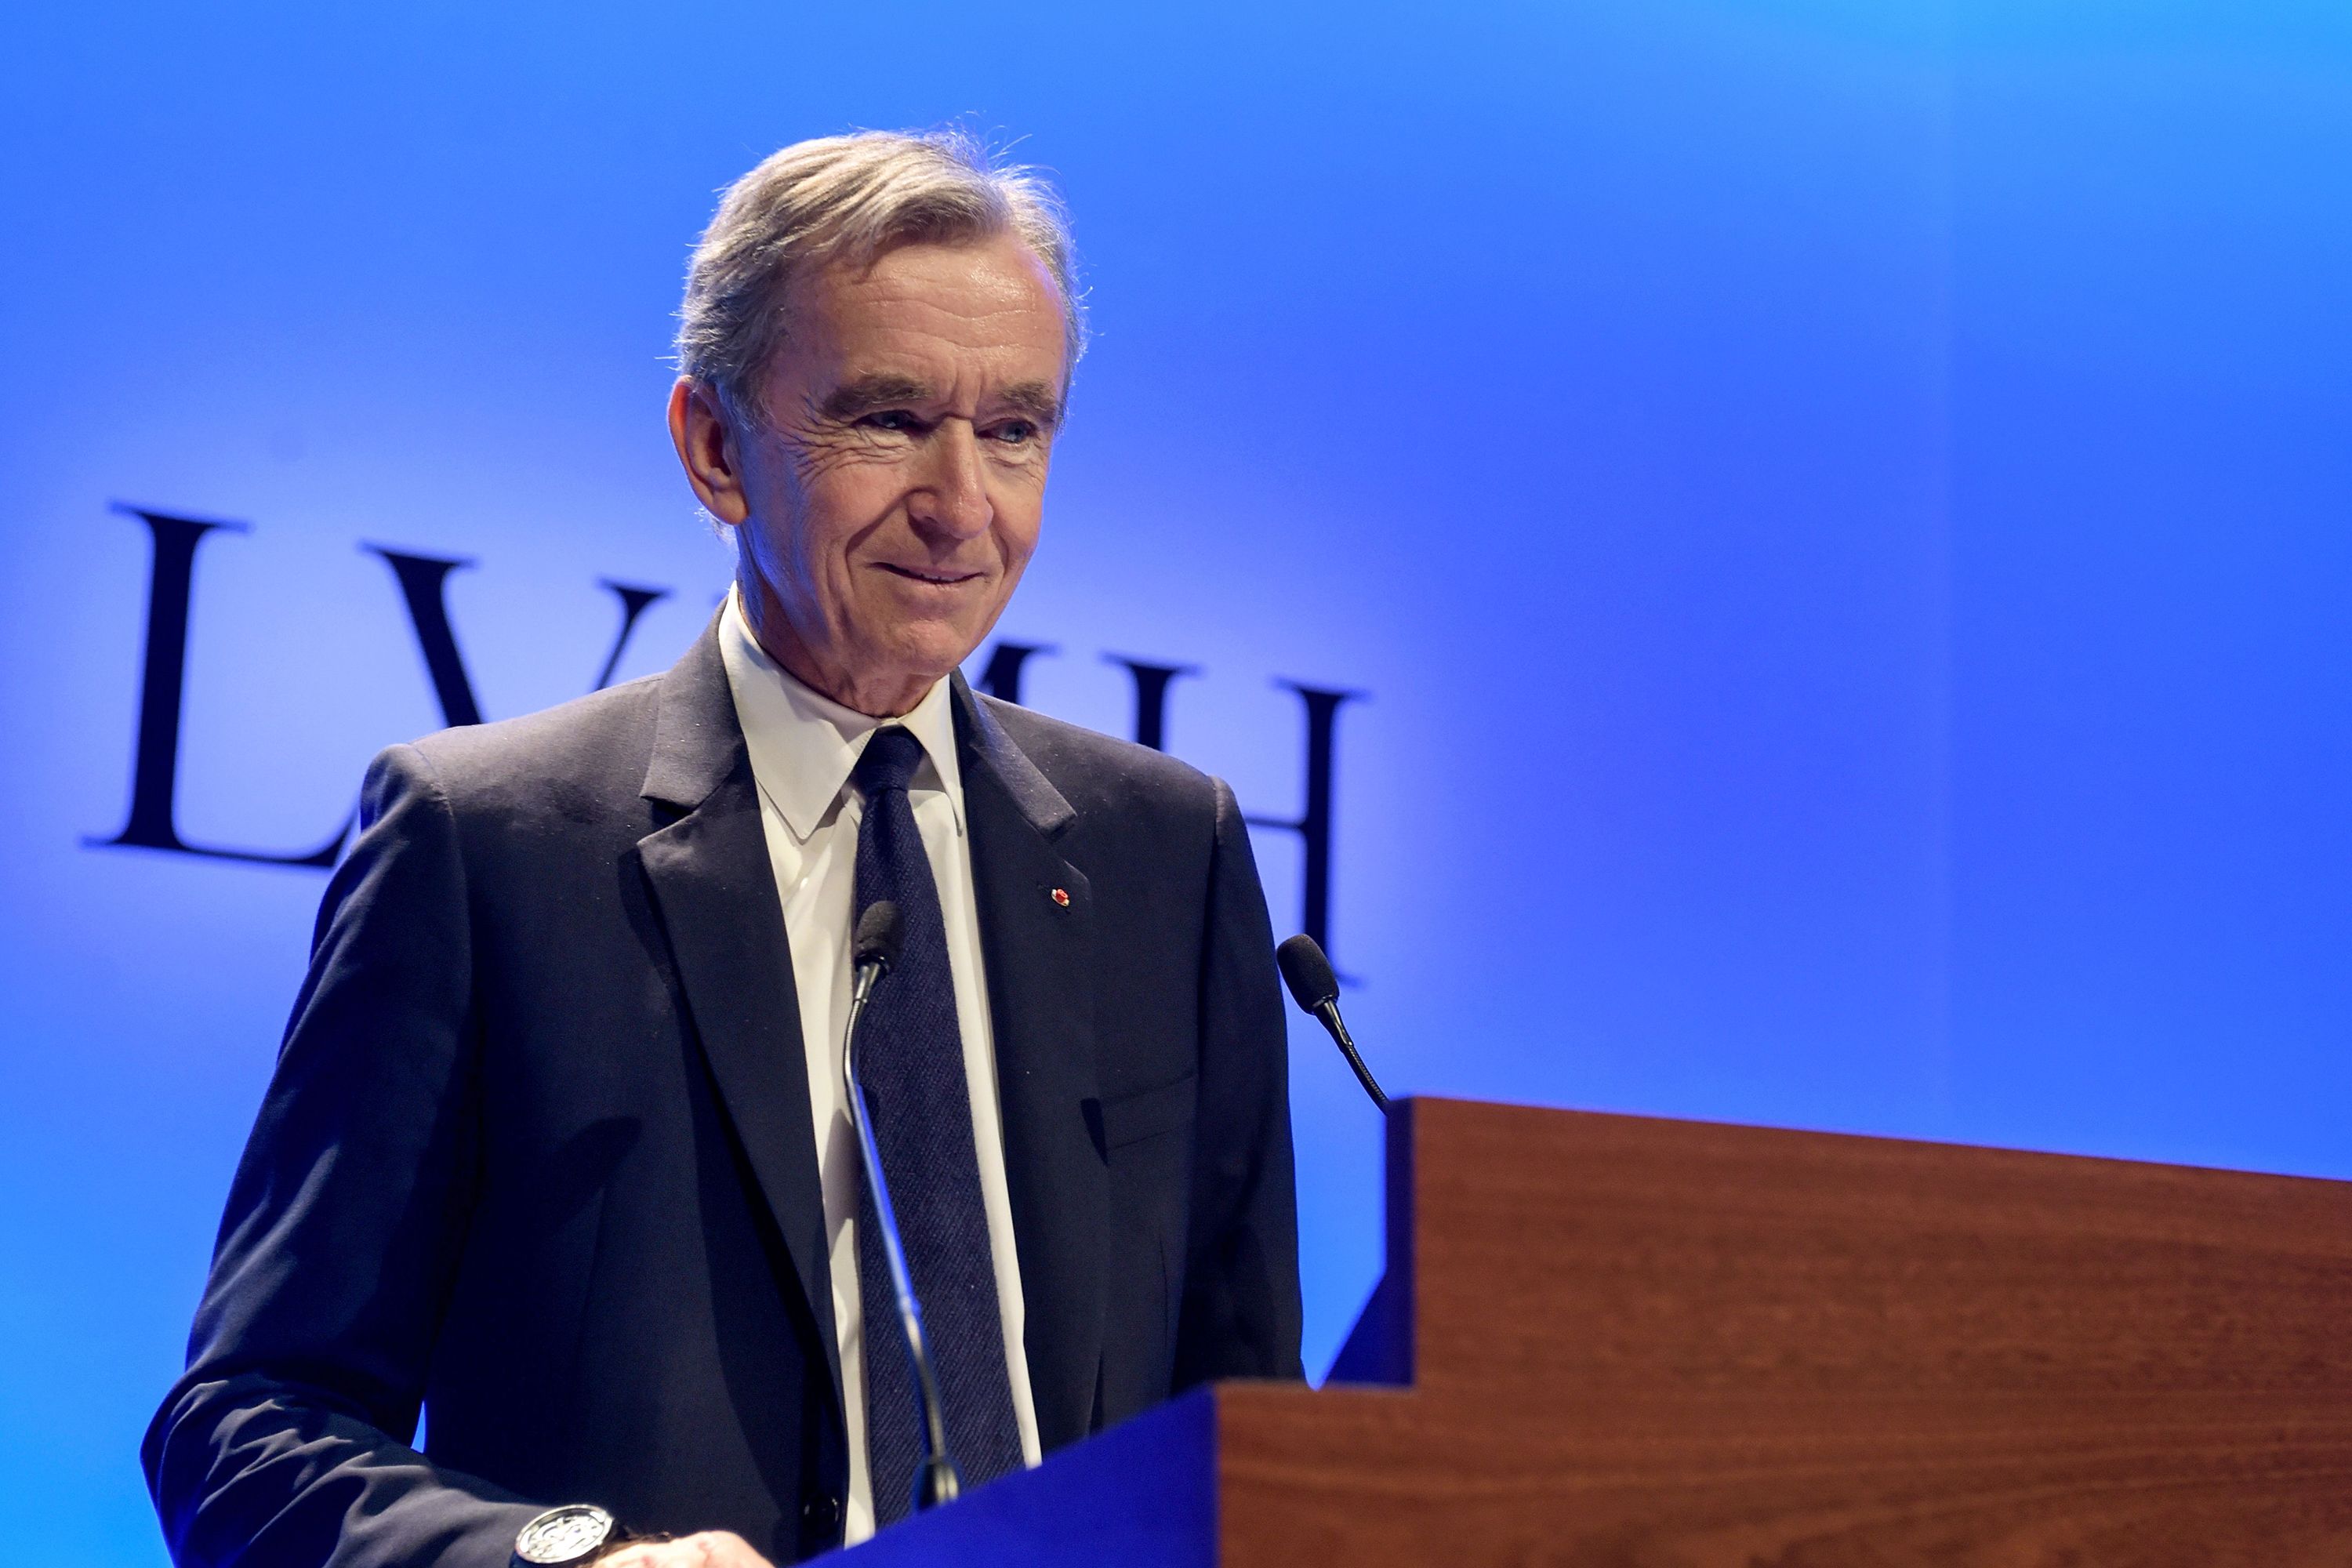 LVMH CEO Bernard Arnault could surpass Jeff Bezos and Bill Gates to become  the world's richest person